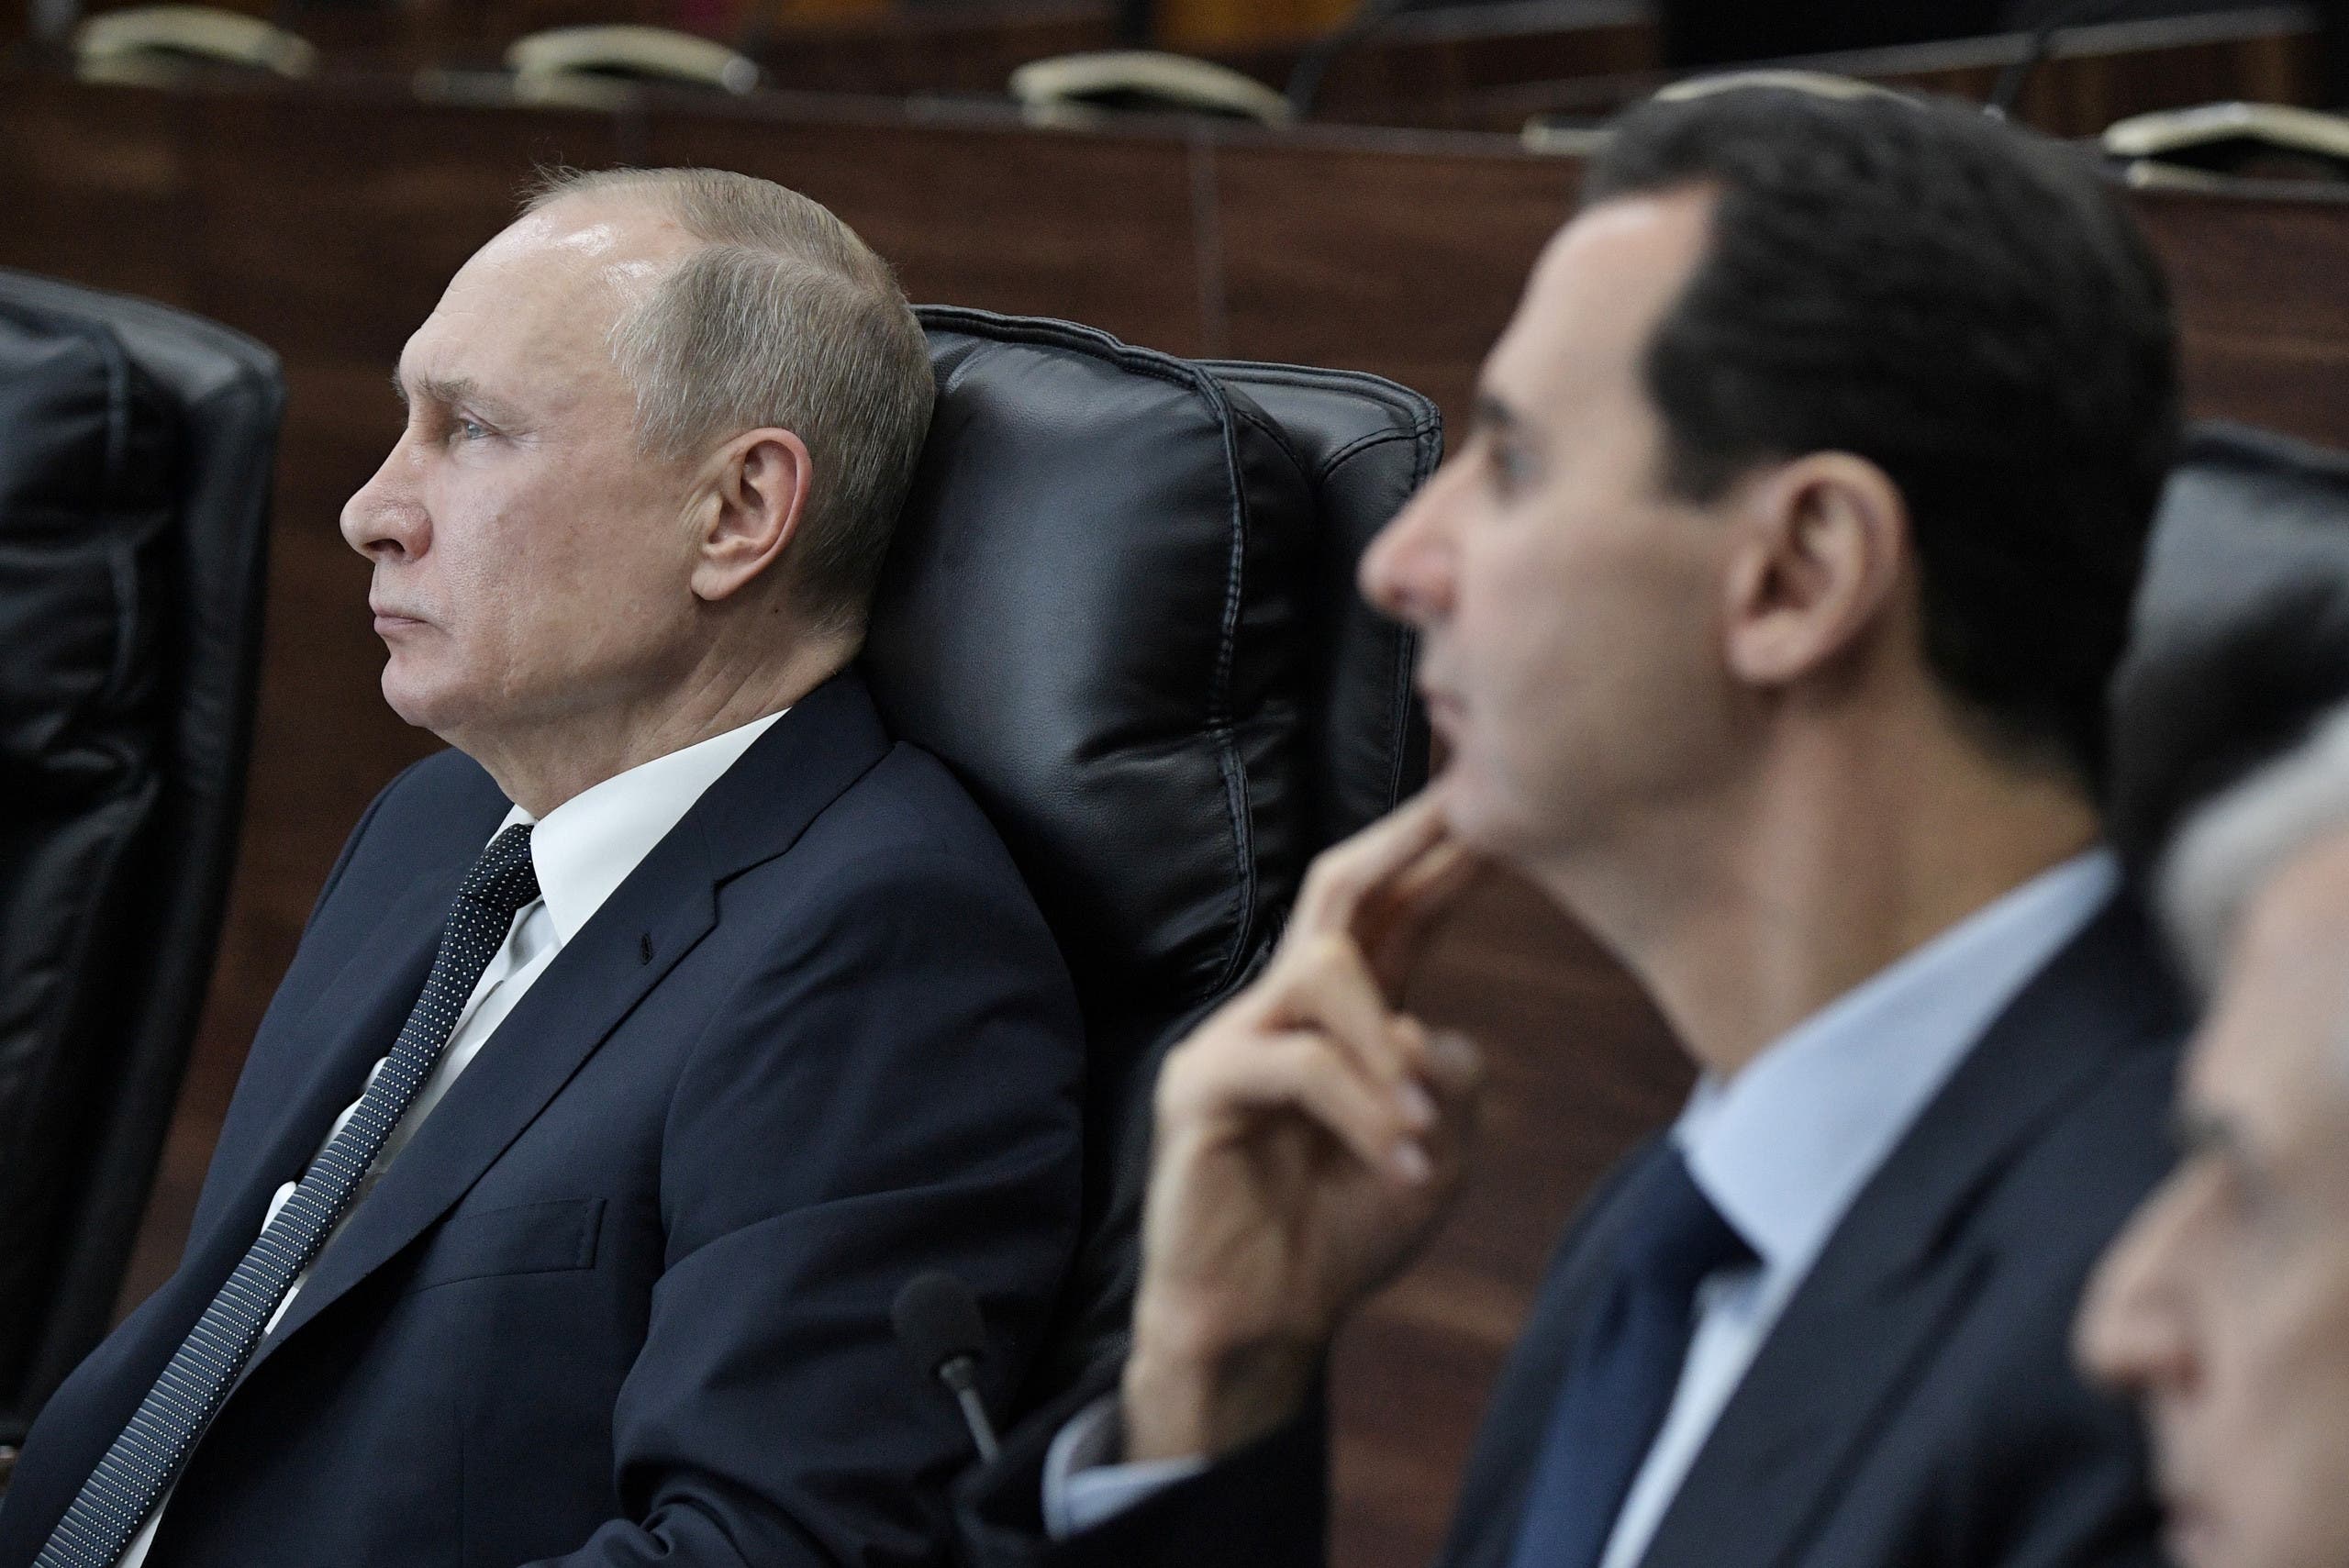 Russian President Vladimir Putin and Syrian President Bashar al-Assad attend a meeting in Damascus, Syria January 7, 2020. (File photo: Reuters)